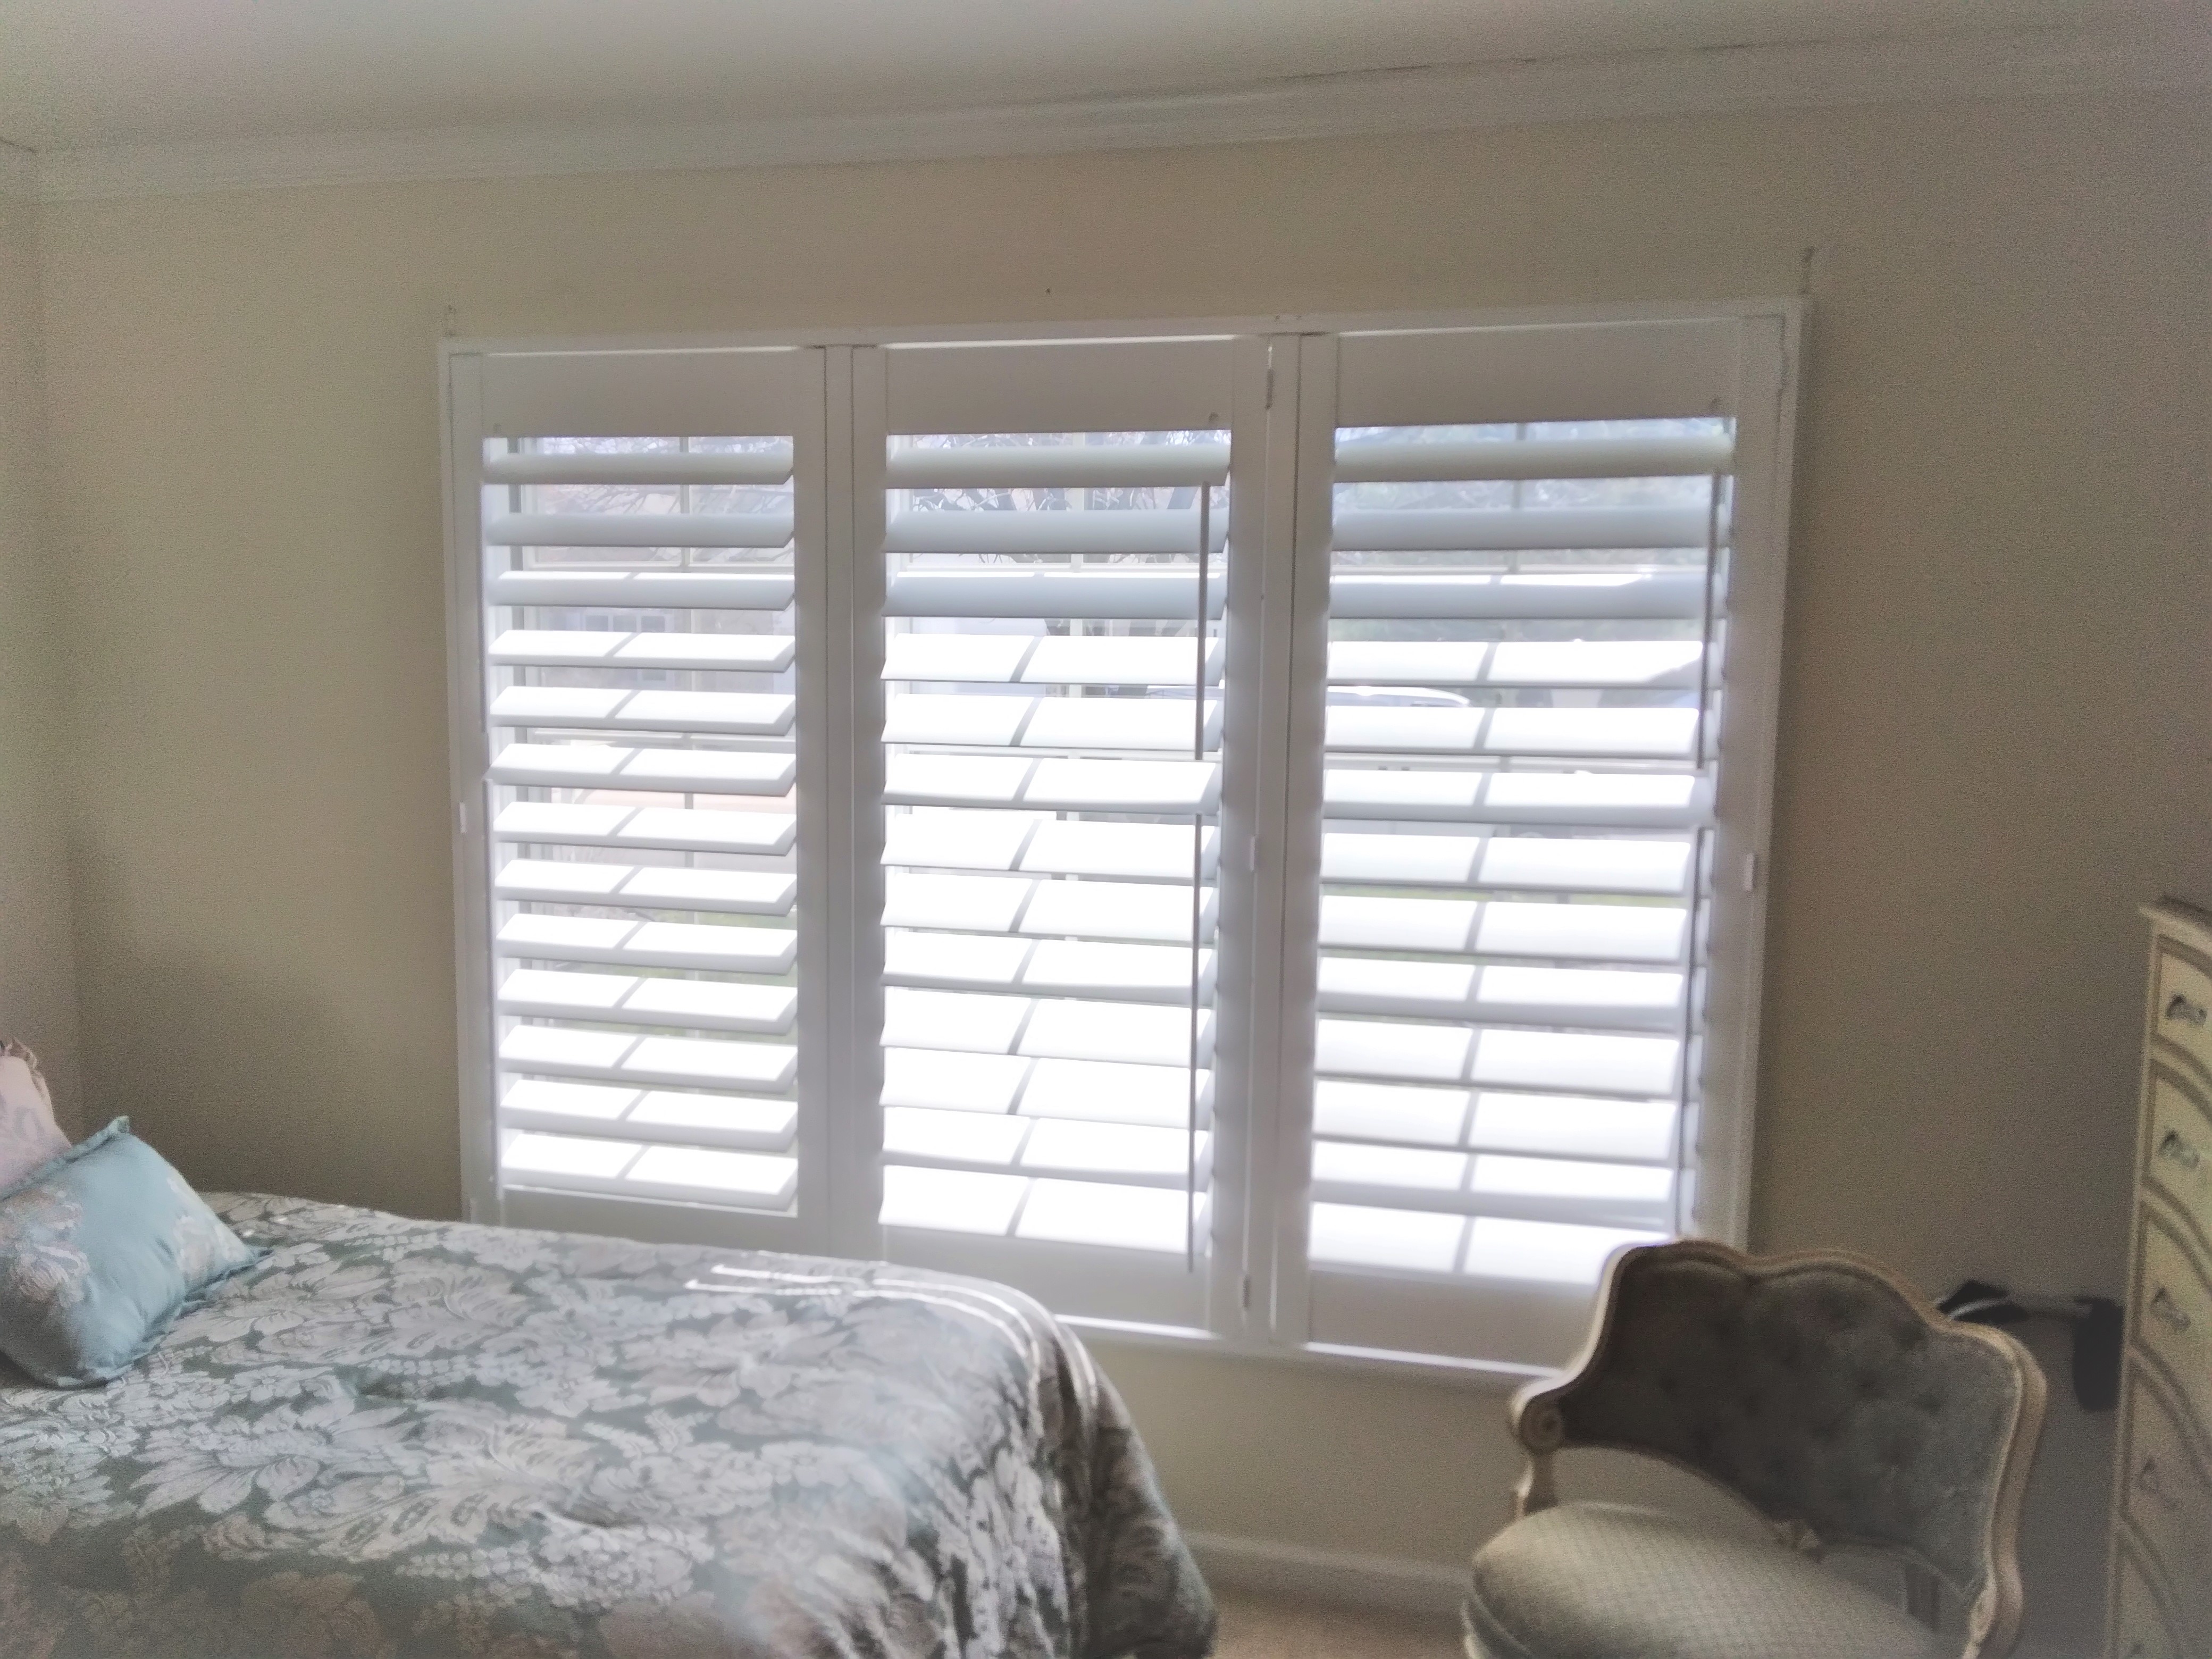 This shutter provides an elegant look to this Springfield Illinois bedroom and allows plenty light in while offering perfect privacy when necessary.  BudgetBlinds  Shutters  PlantationShutters  Blinds  WindowCoverings  SpringfieldIllinois